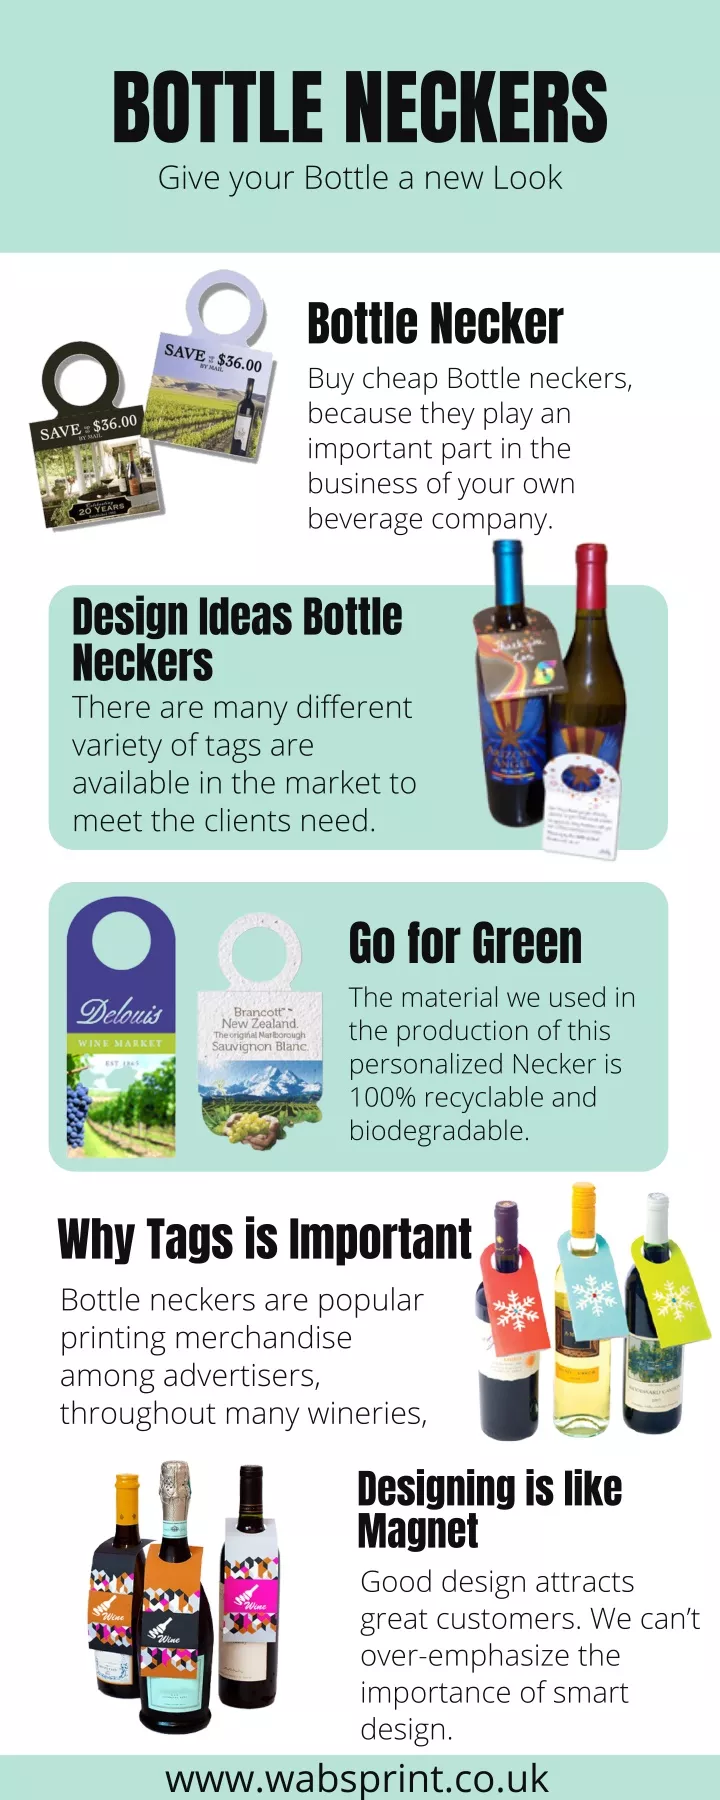 bottle neckers give your bottle a new look